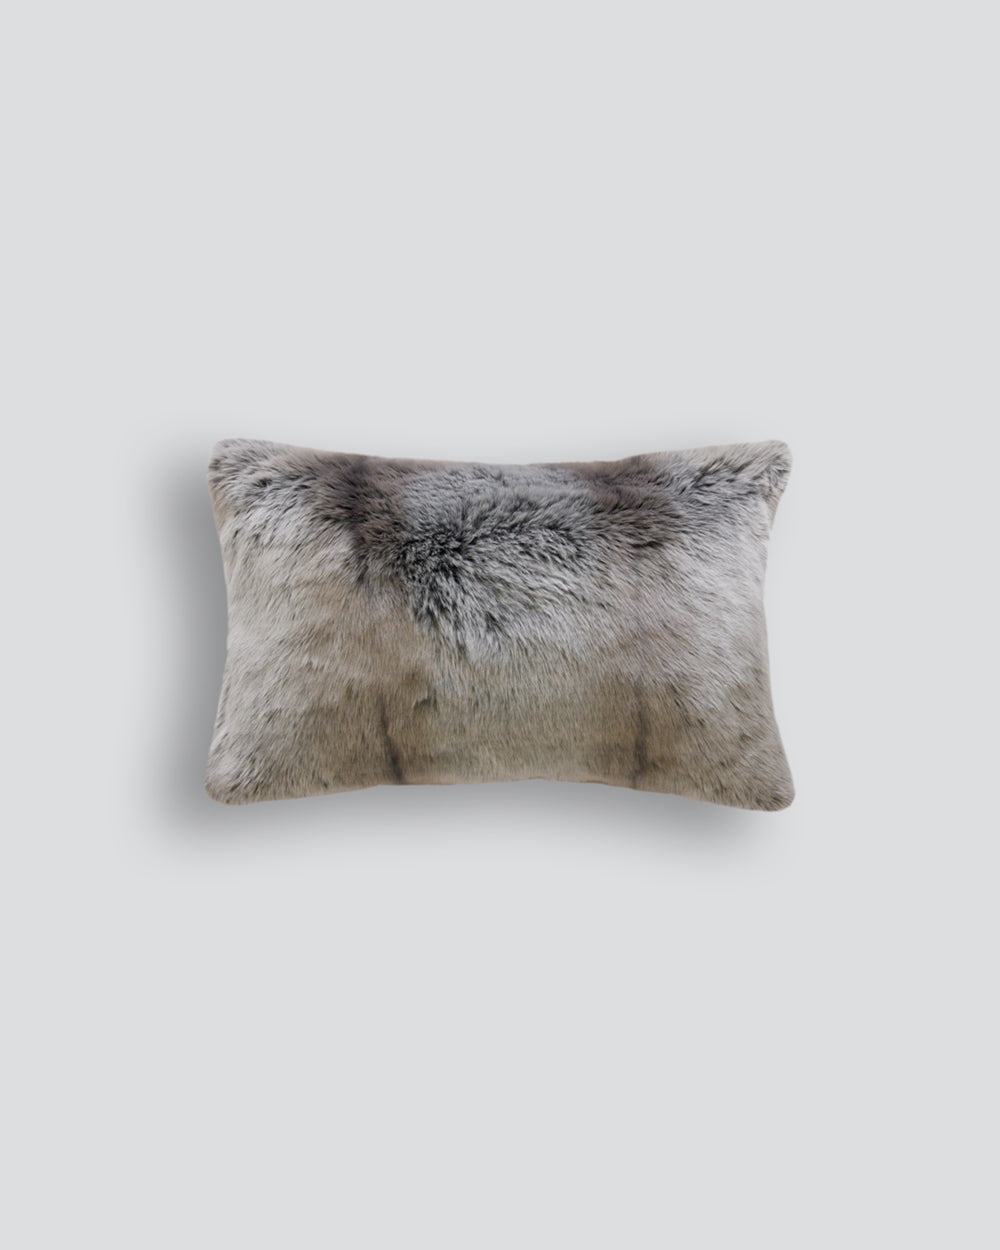 Heirloom Silver Marten Cushions in Faux Fur are available from Make Your House A Home Premium Stockist. Furniture Store Bendigo, Victoria. Australia Wide Delivery. Furtex Baya.